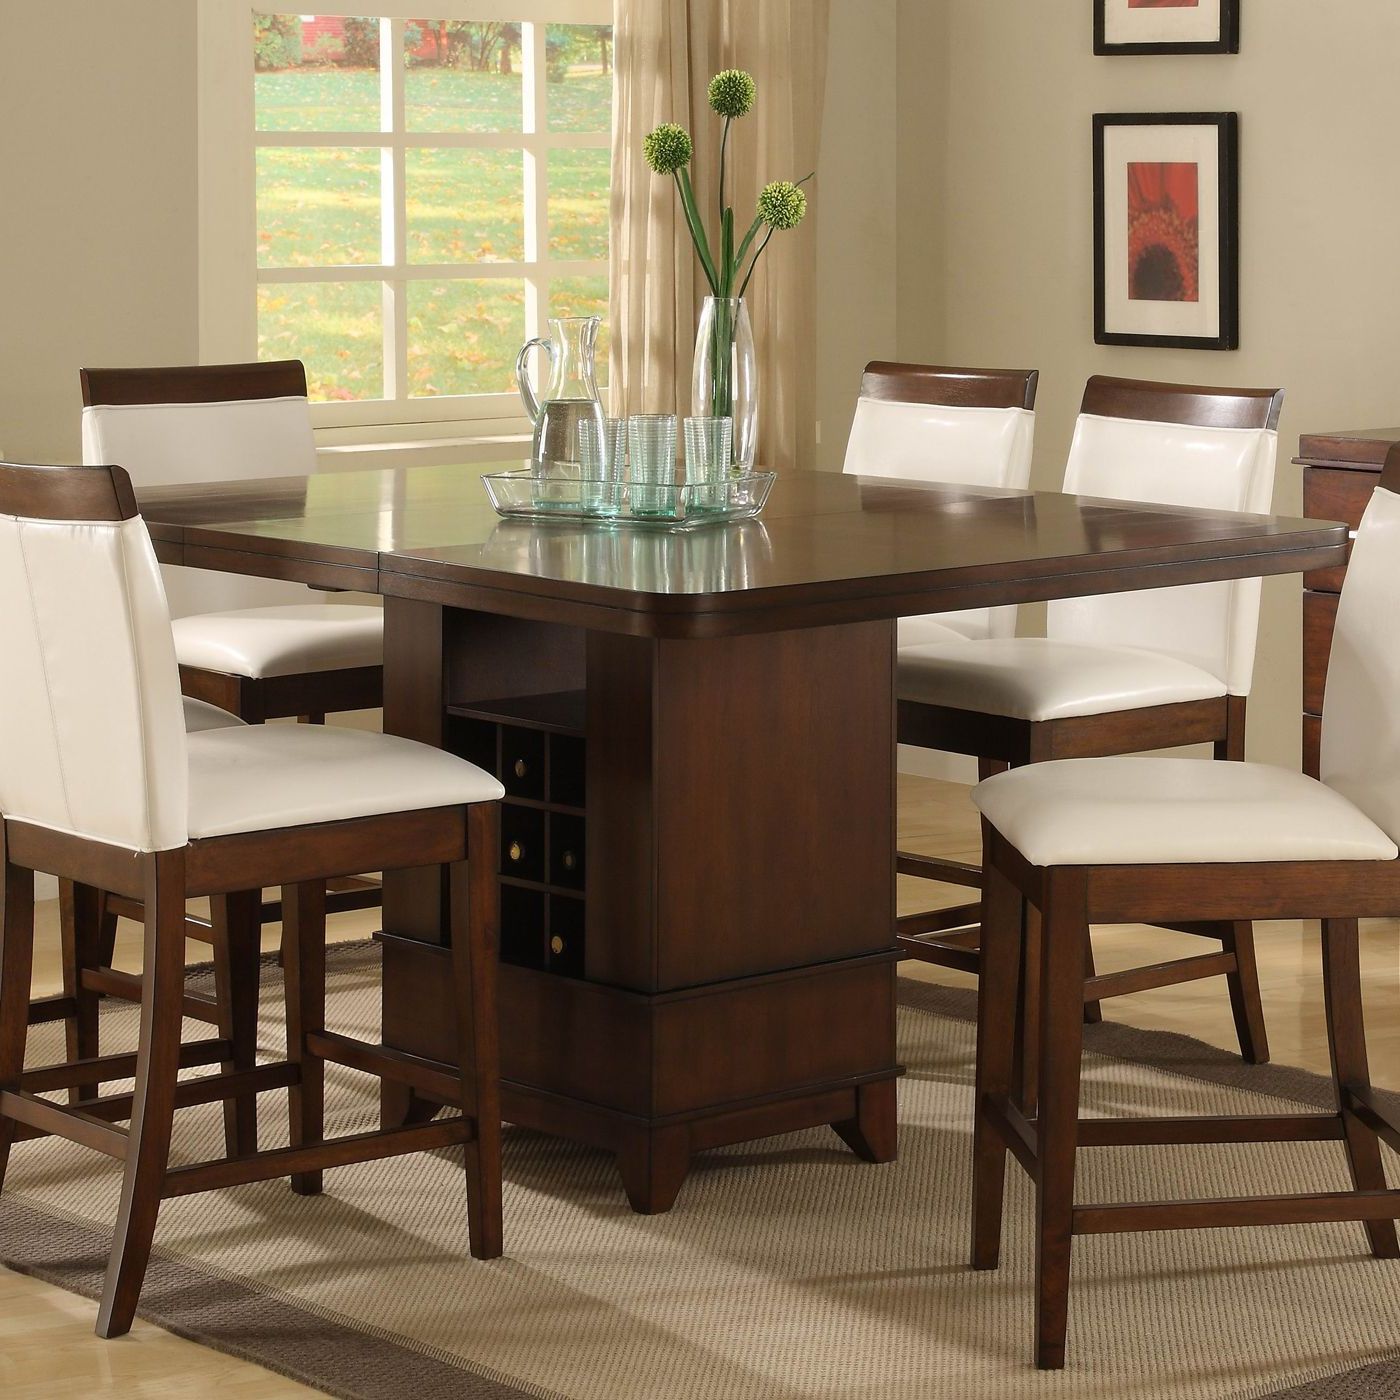 Liesel Bar Height Pedestal Dining Tables Within Trendy Pedestal Table Elmhurst Counter Height Dining Table, Brown (View 17 of 20)